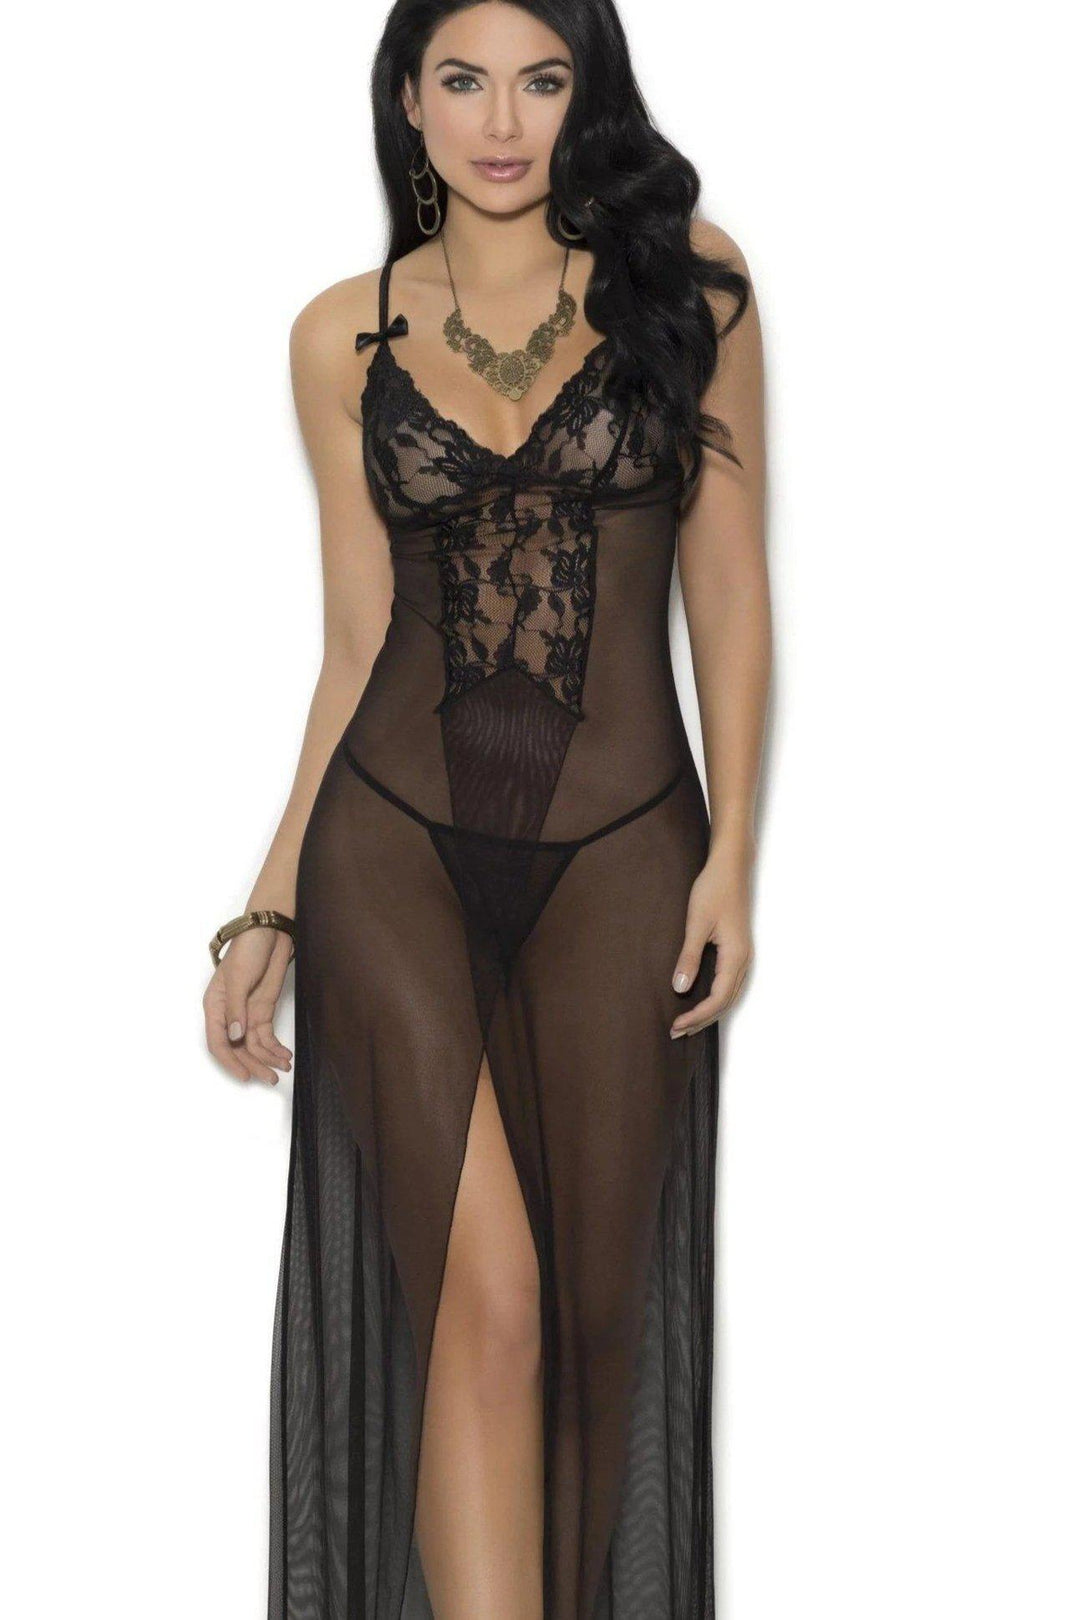 Long Mesh Gown with Satin Bows and Lace Includes Matching G-String-Elegant Moments-SEXYSHOES.COM